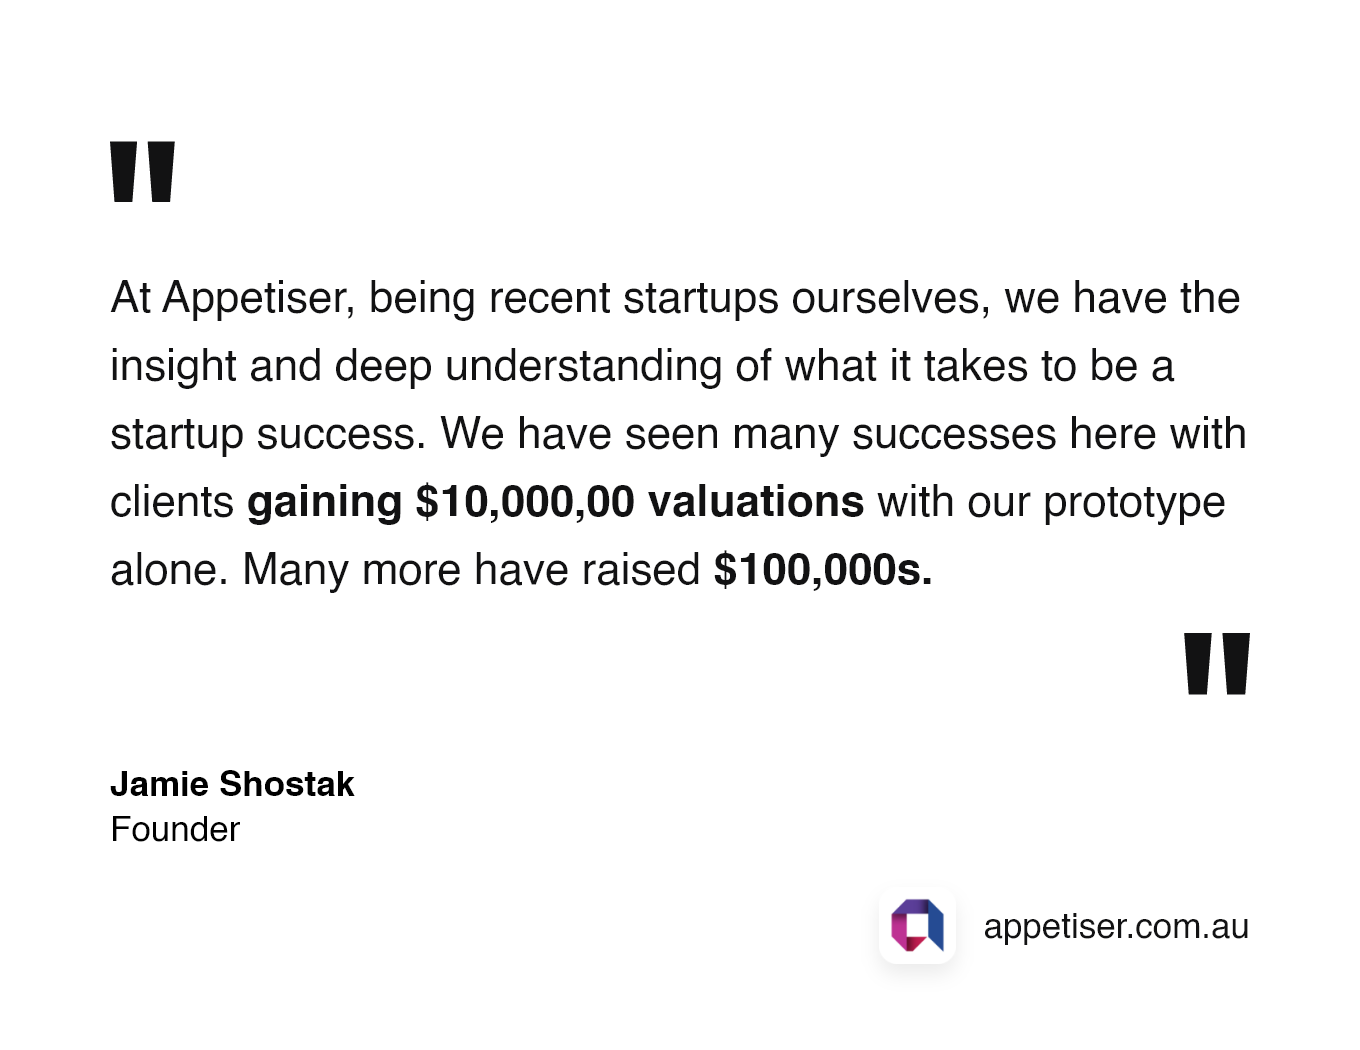 QTAAAD: quotes from Appetiser founder